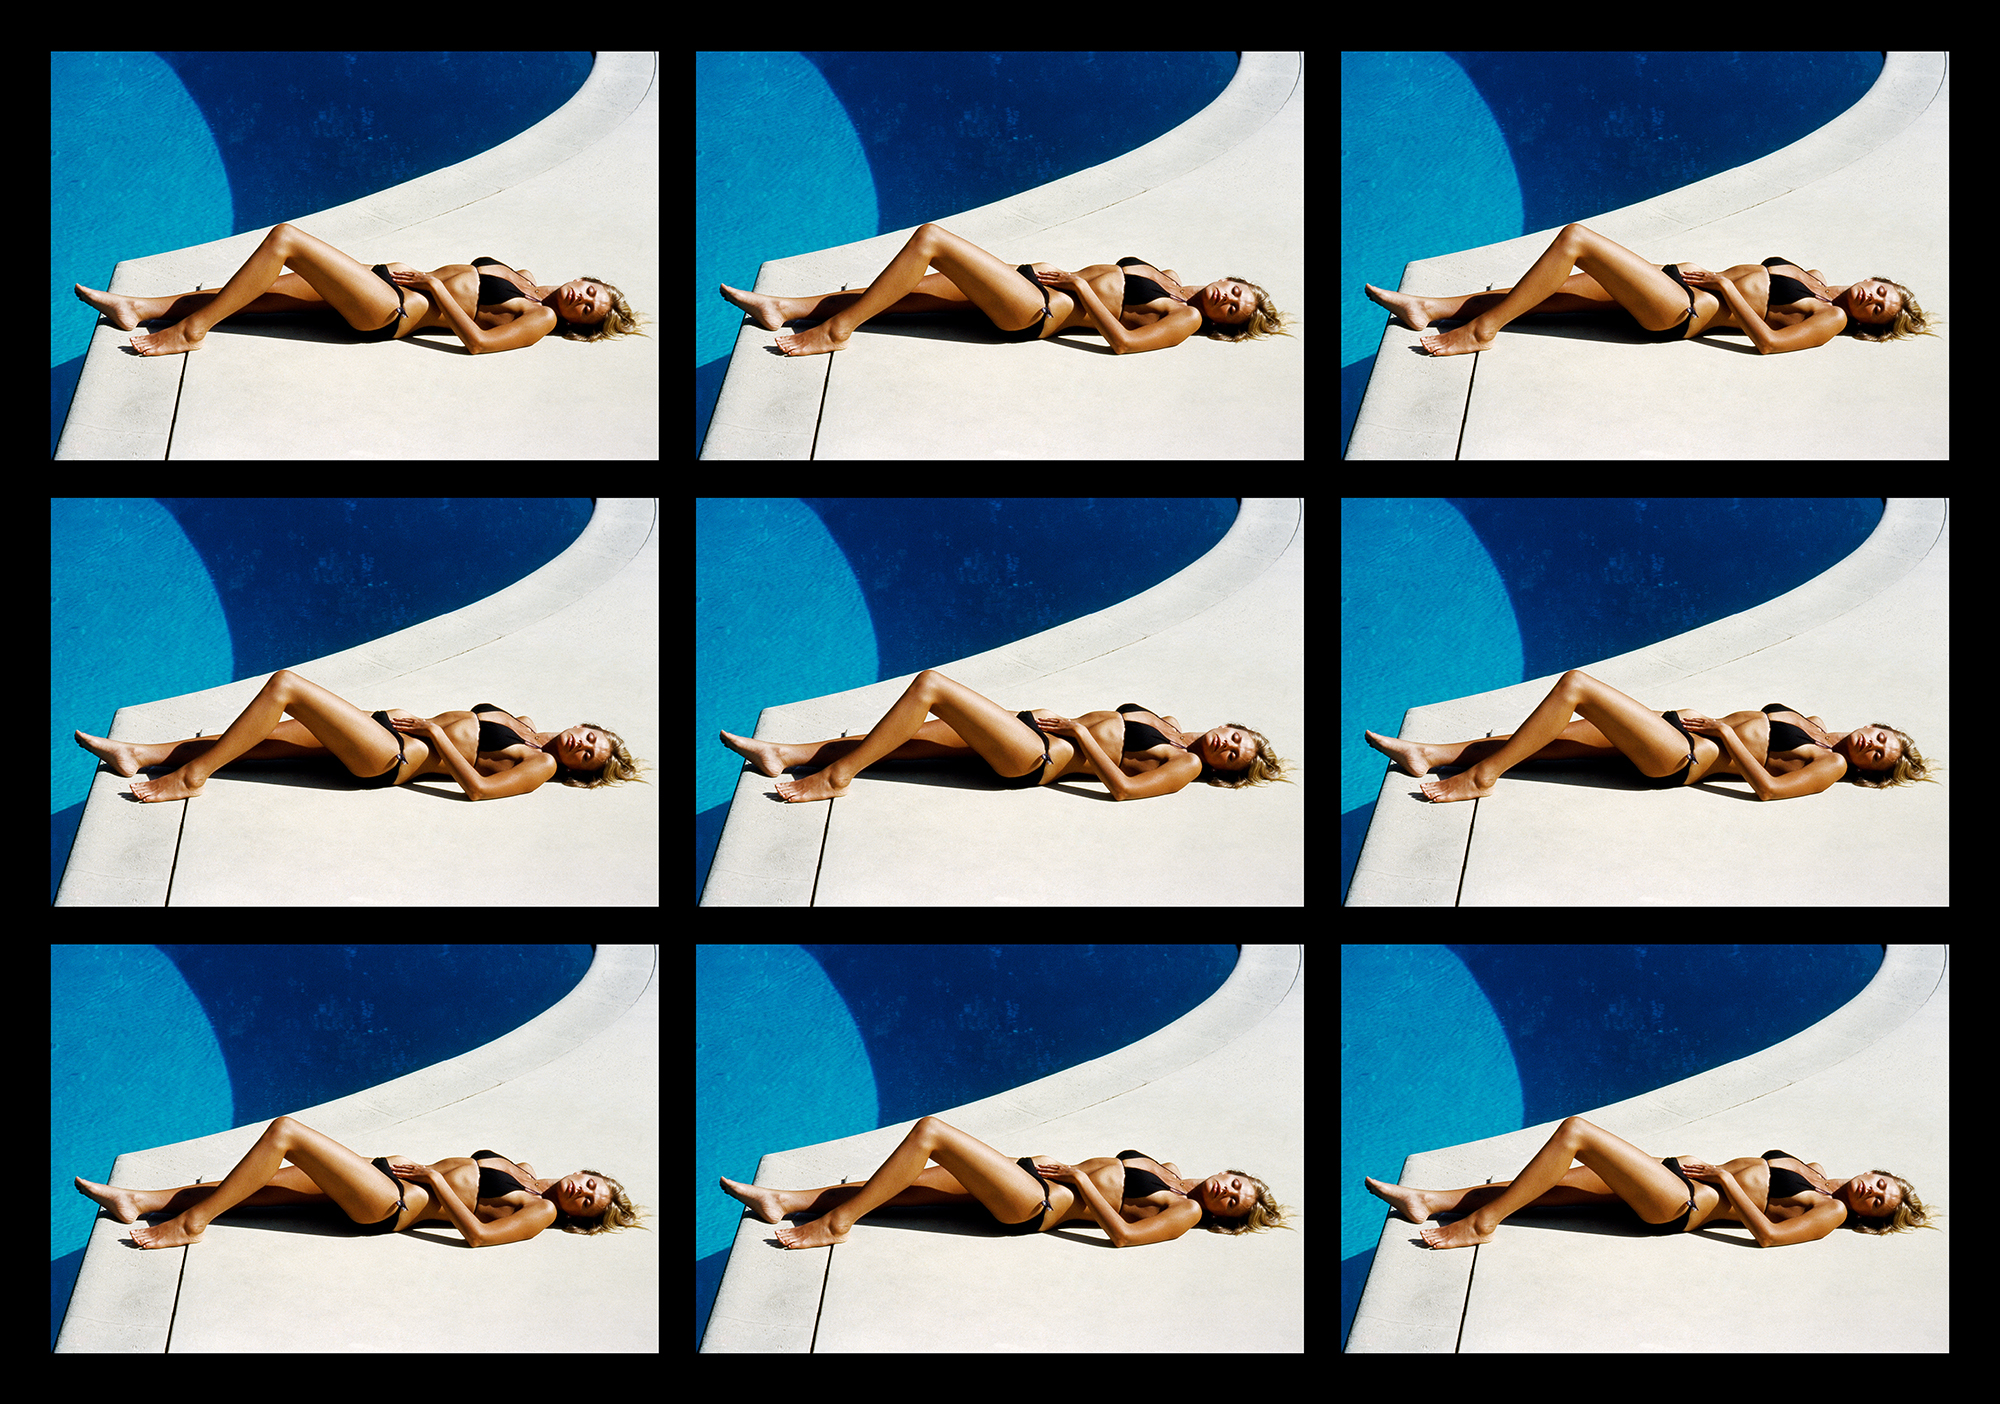 photographic montage of britt ekland sunbathing by her bel air swimming pool by david steen